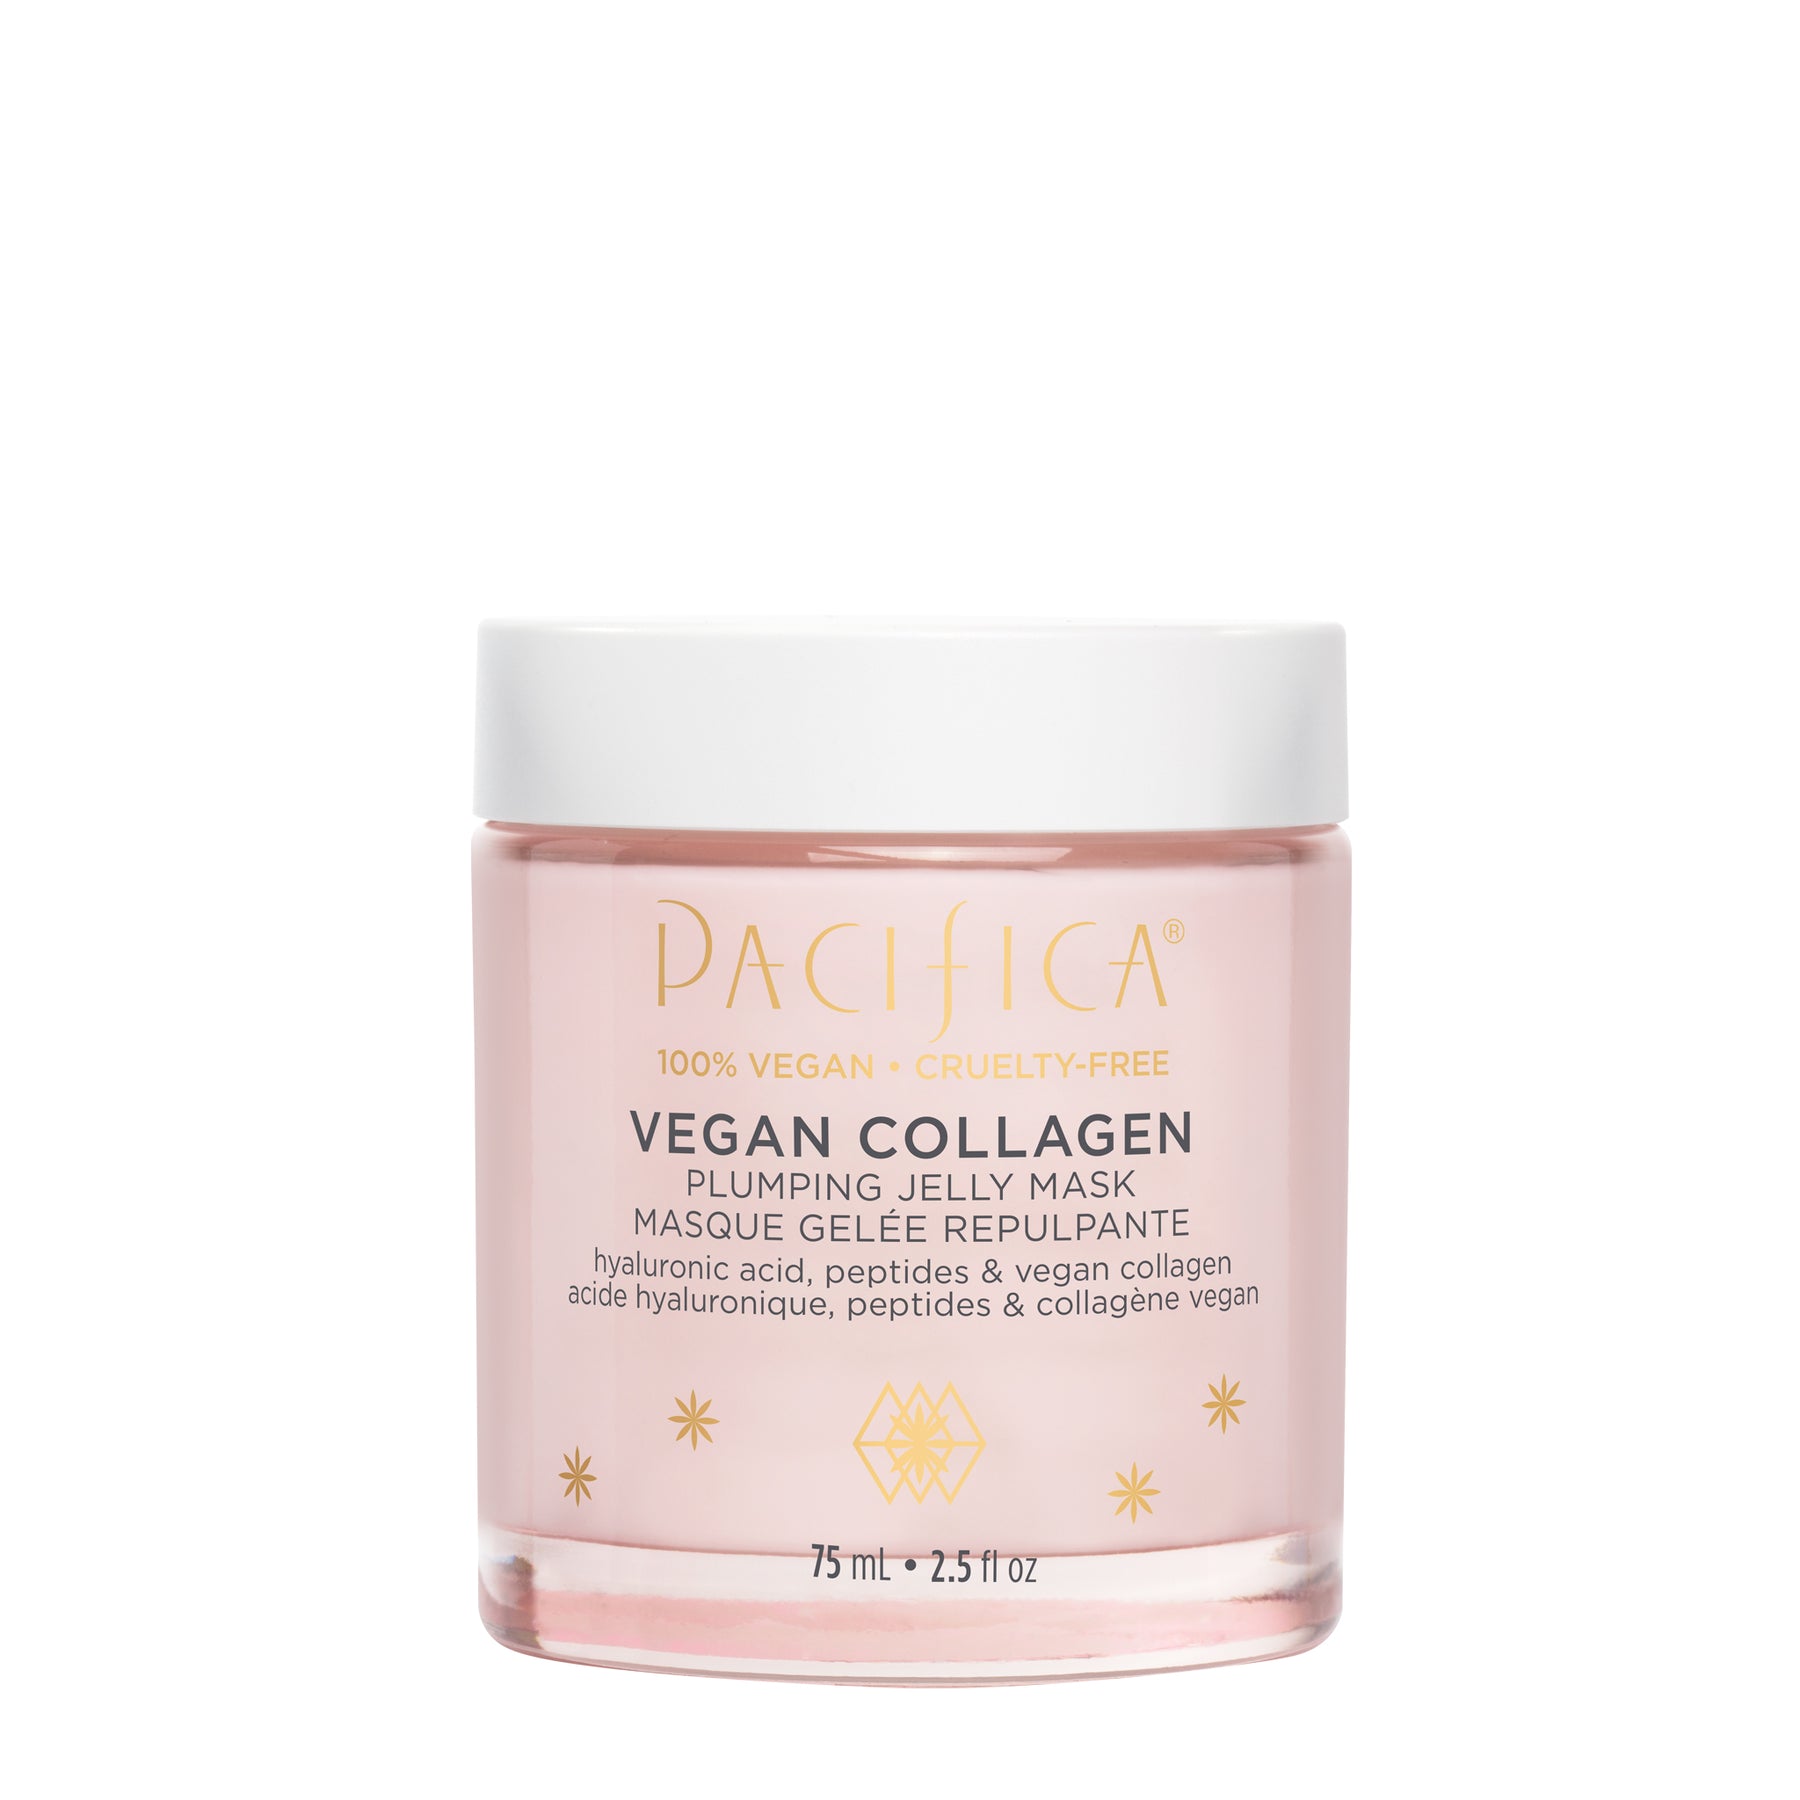 Vegan Collagen Plumping Jelly Mask - Skin Care - Pacifica Beauty